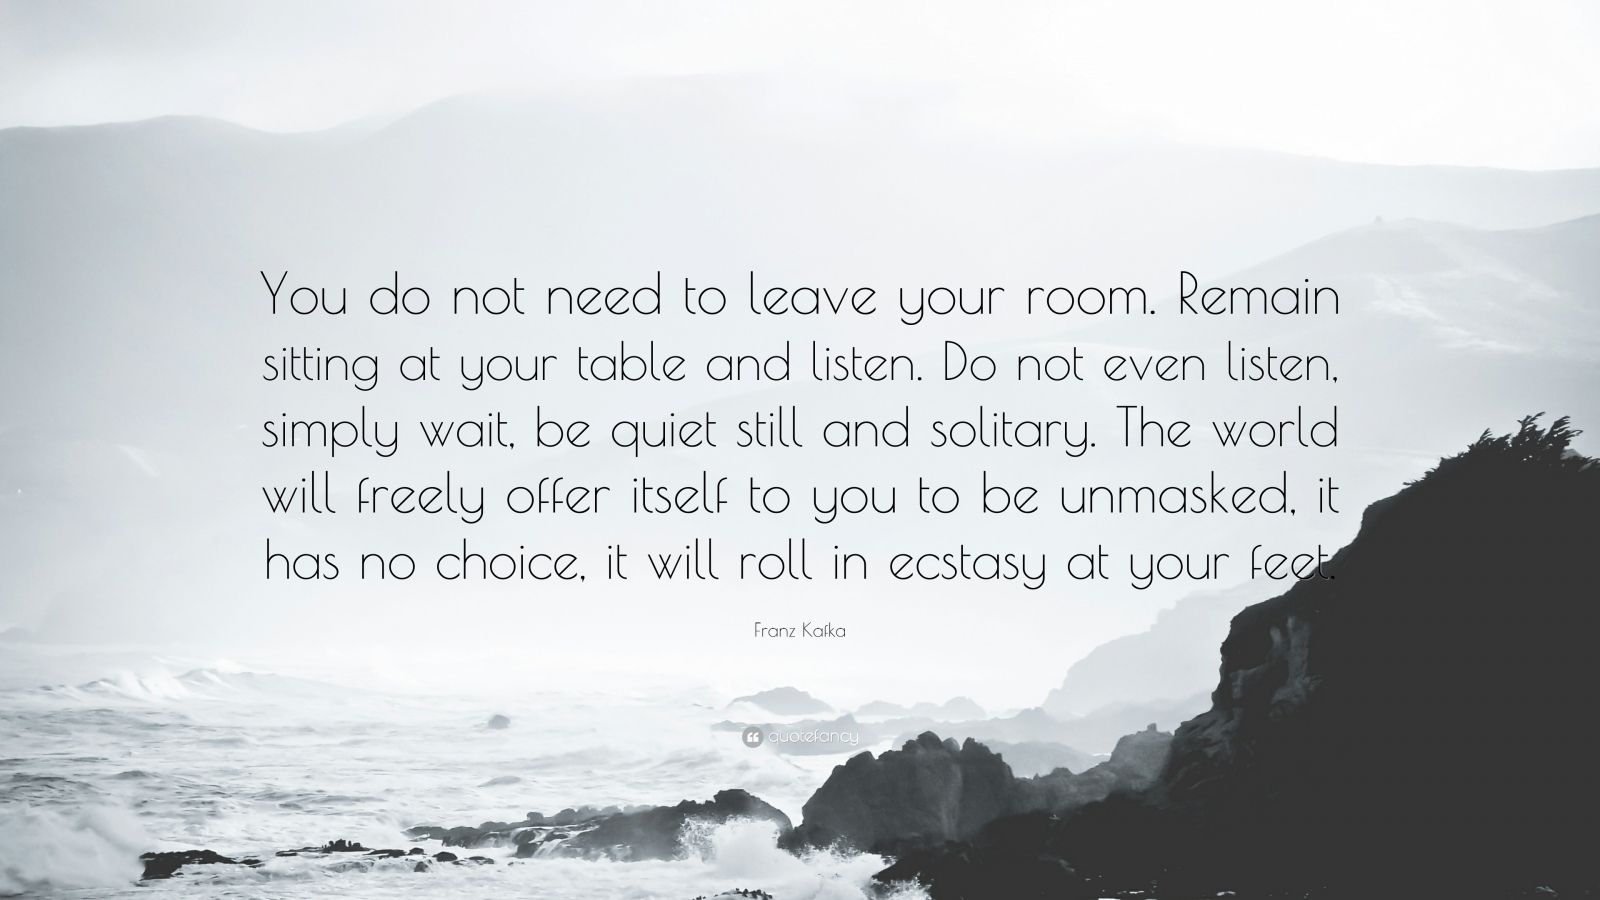 Franz Kafka Quote: “You do not need to leave your room. Remain sitting